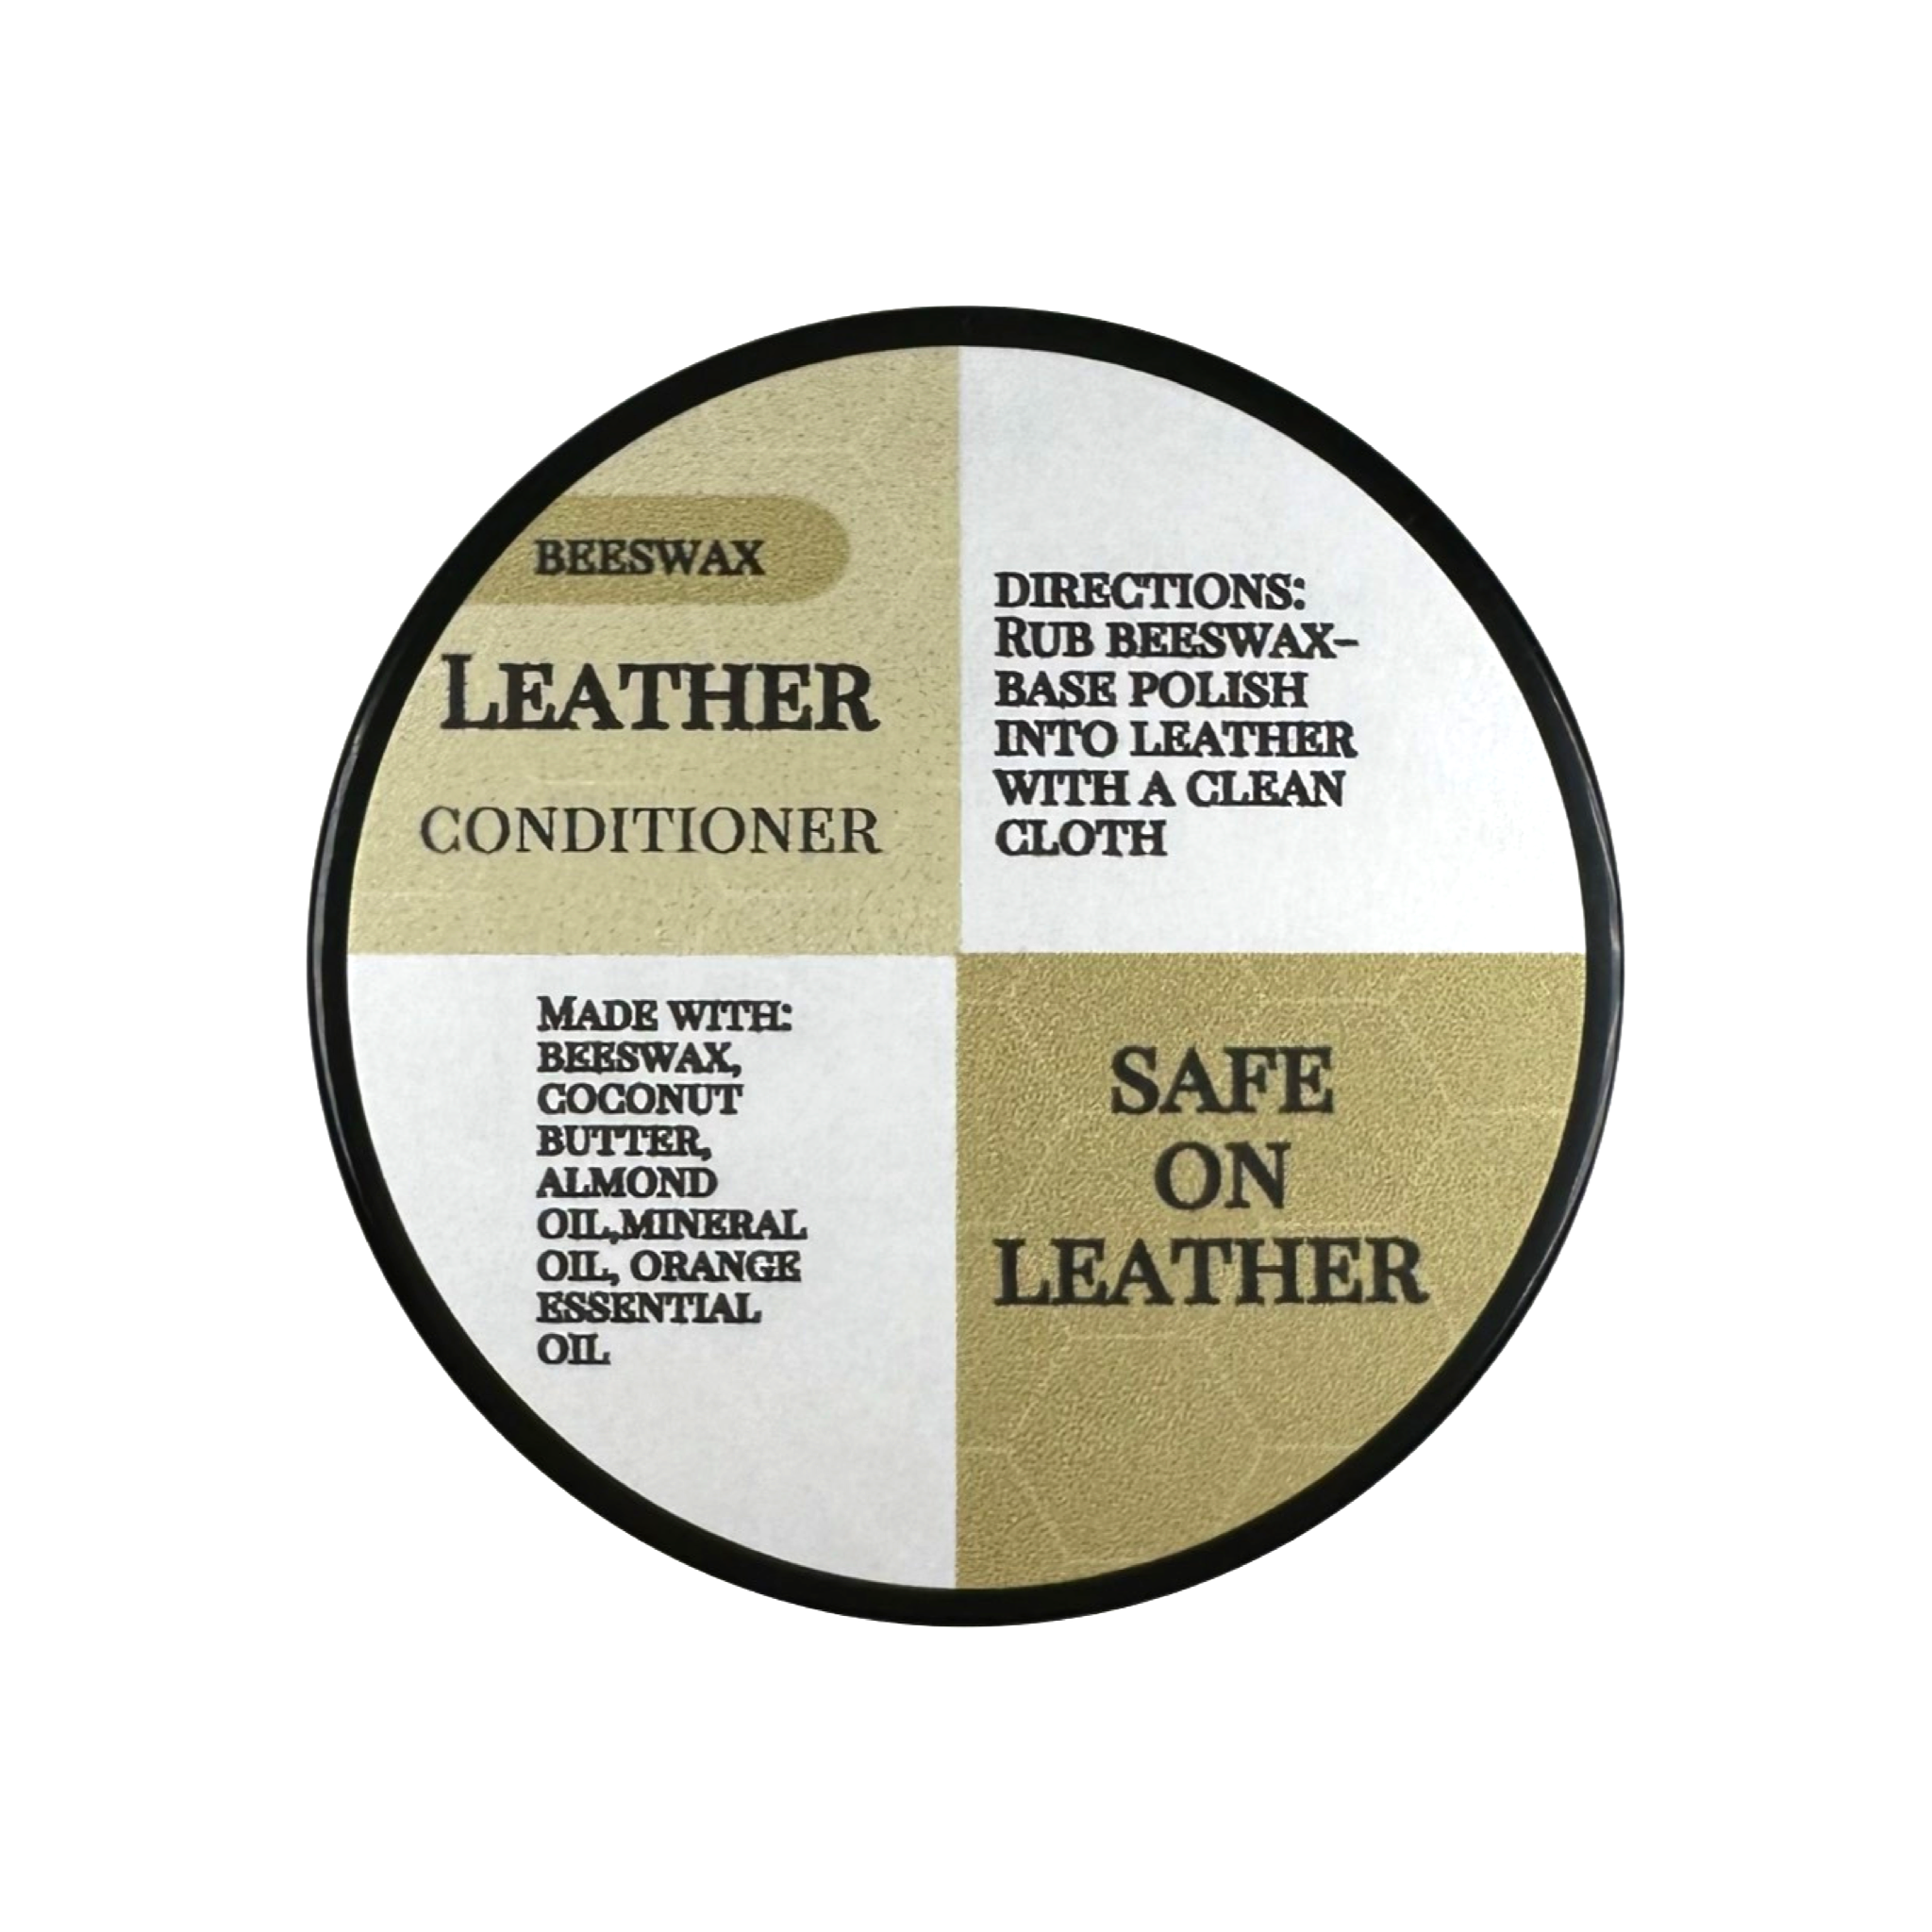  Beeswax Leather Conditioner Restorer & Polish - Hand Poured  British Beeswax Balsam CLEANS SEALS and PROTECTS Handcrafted in Wales UK  Rich Natural Leather Conditioner and Leather Restorer 3.50 Fl Oz :  Automotive